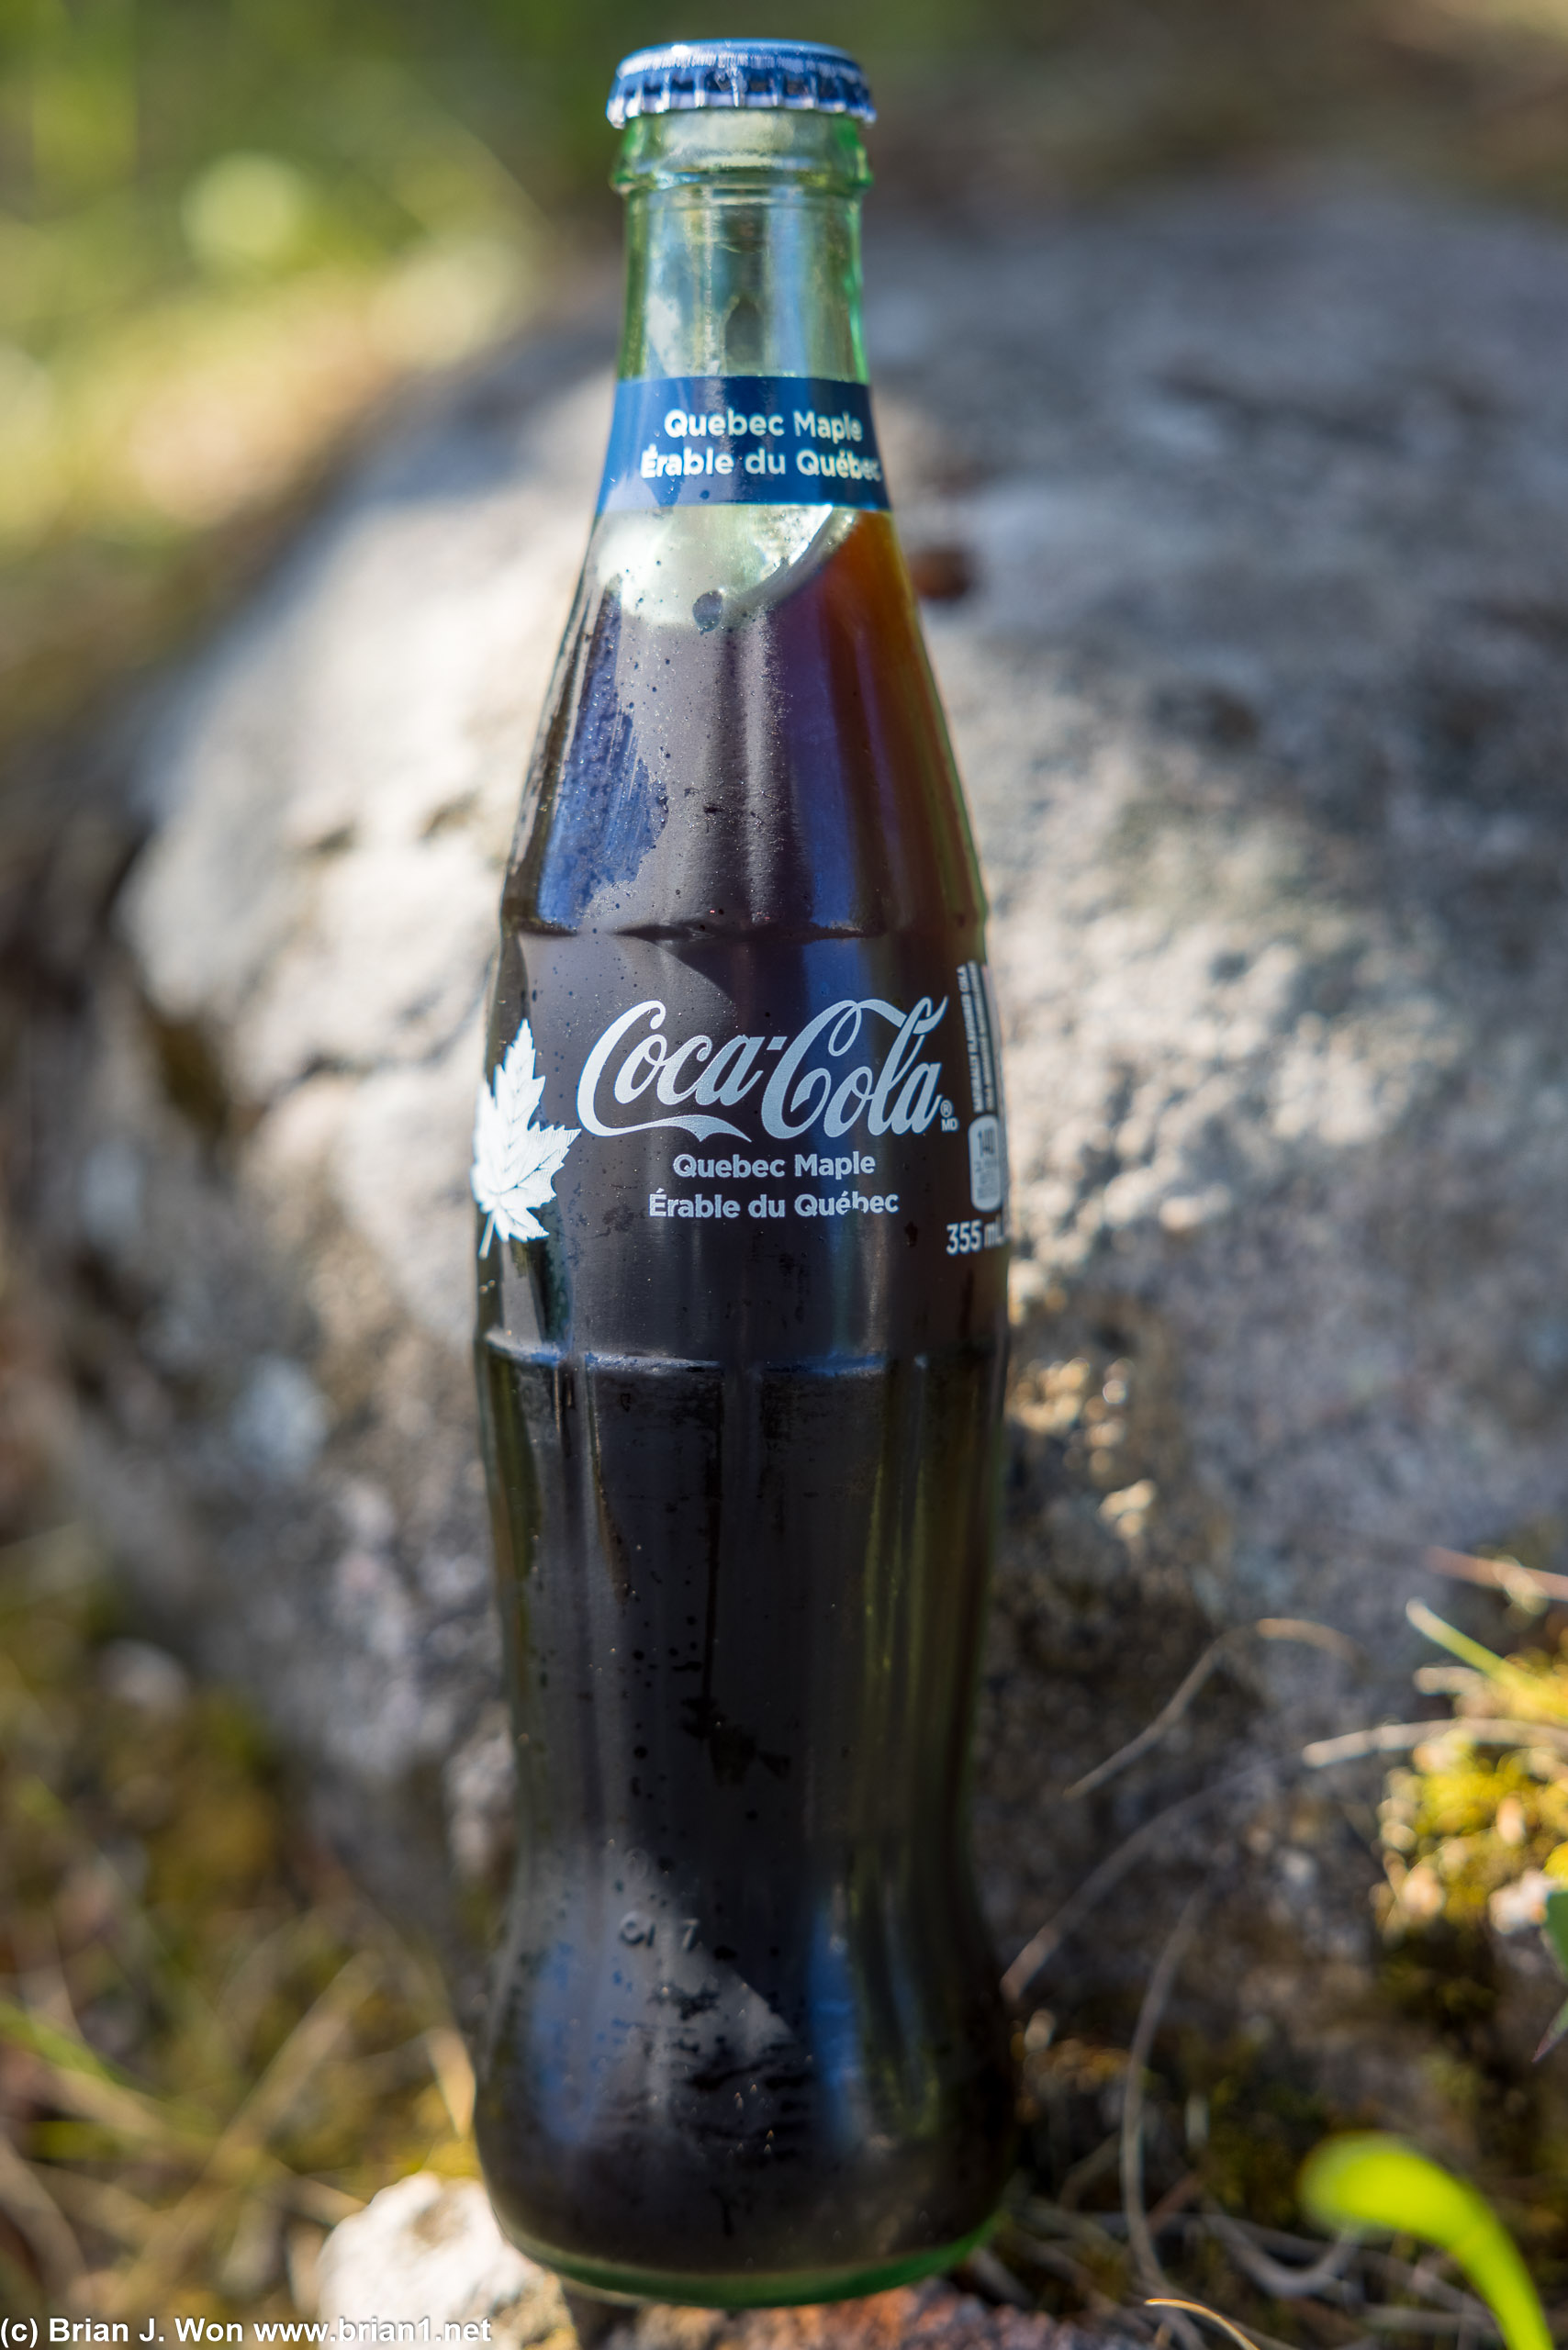 Coca-Cola Quebec Maple was surprisingly subtle. Not very interesting TBH.